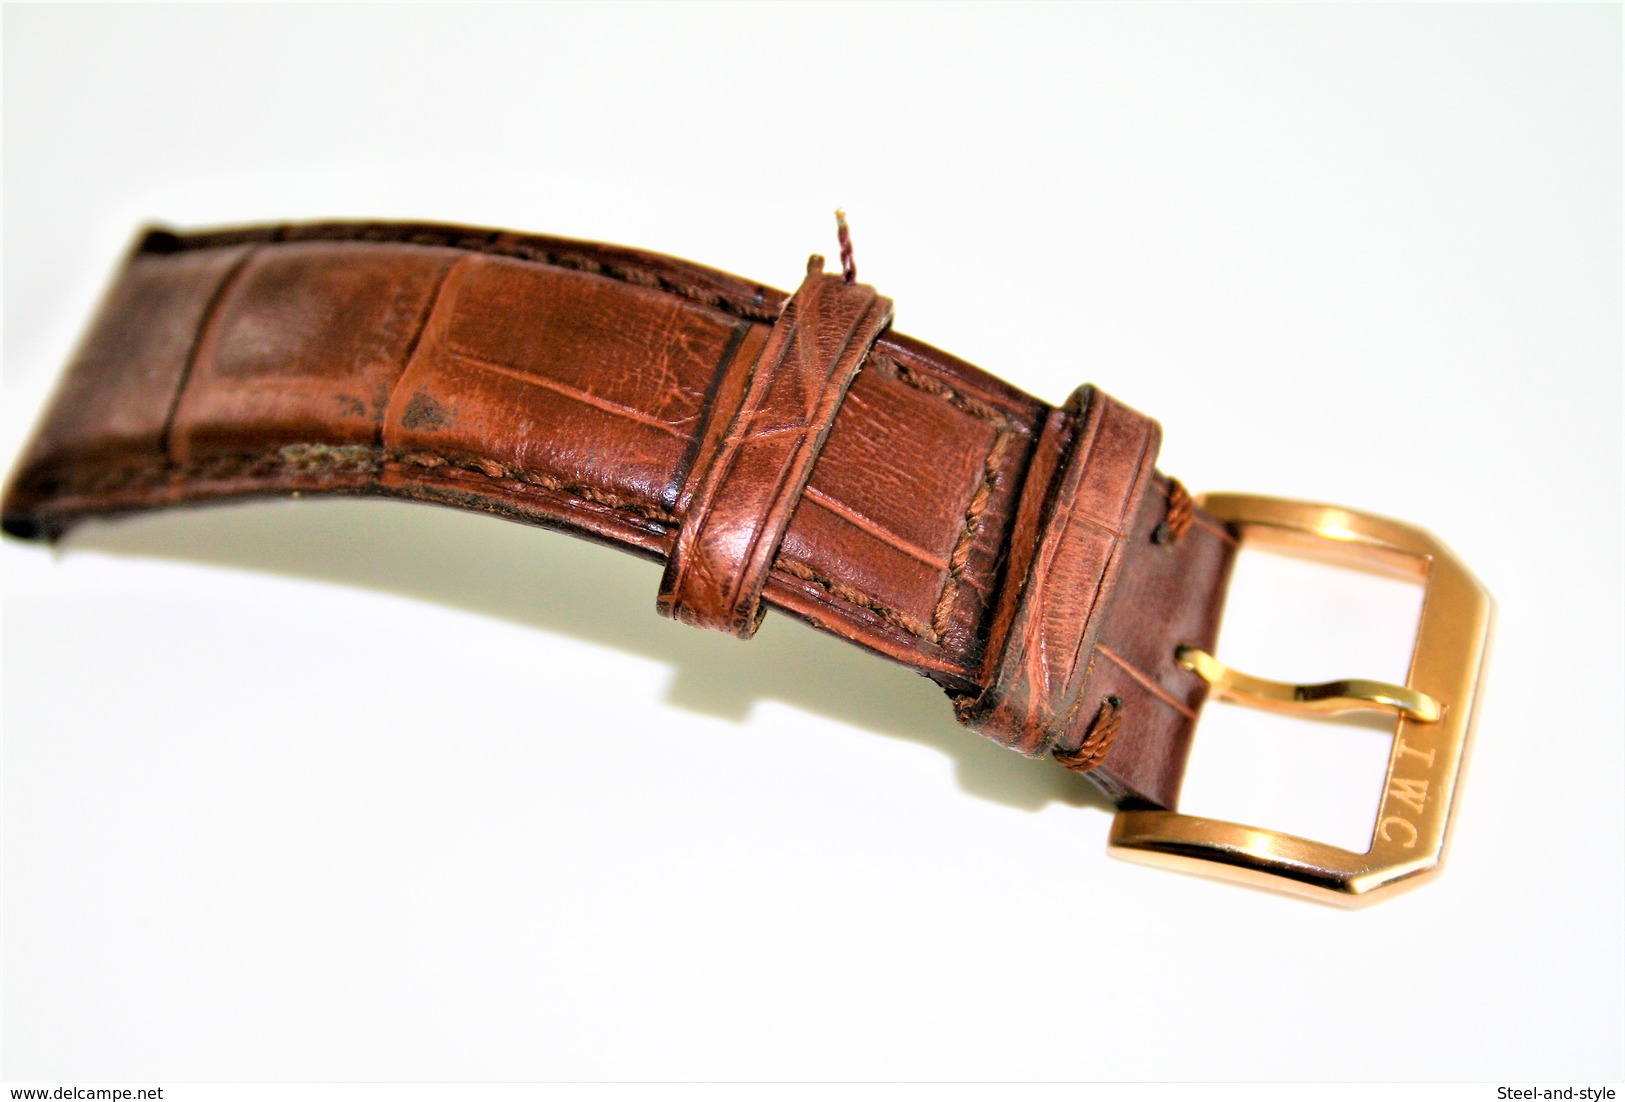 Watches BANDS : IWC BOUCLE AND TOP PART BAND VINTAGE USED GENUINE LEATHER - RaRe - Original - Orologi Di Lusso